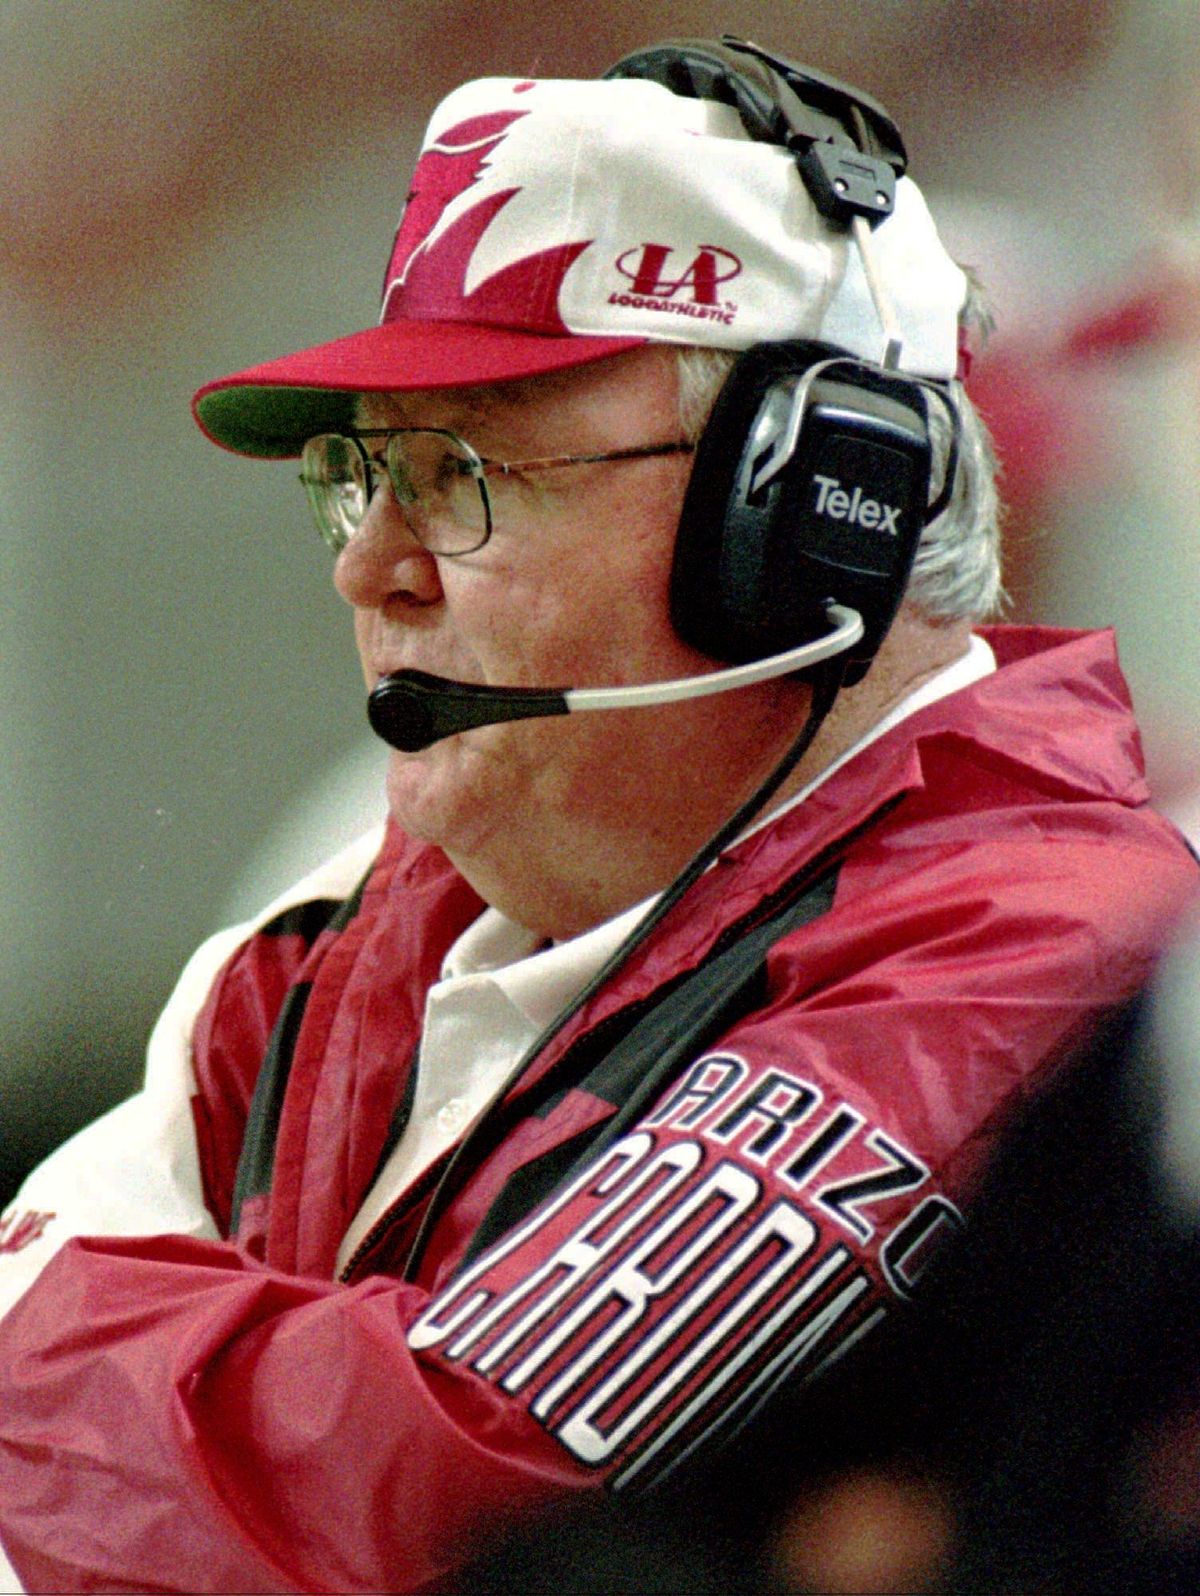 Arizona Cardinals head coach Buddy Ryan watches as his Cardinals have their playoff hopes cut short by the Atlanta Falcons at the Georgia Dome in Atlanta, Dec. 24, 1994. Ryan died on Tuesday at the age of 82. (ANDREW INNERARITY / Associated Press)